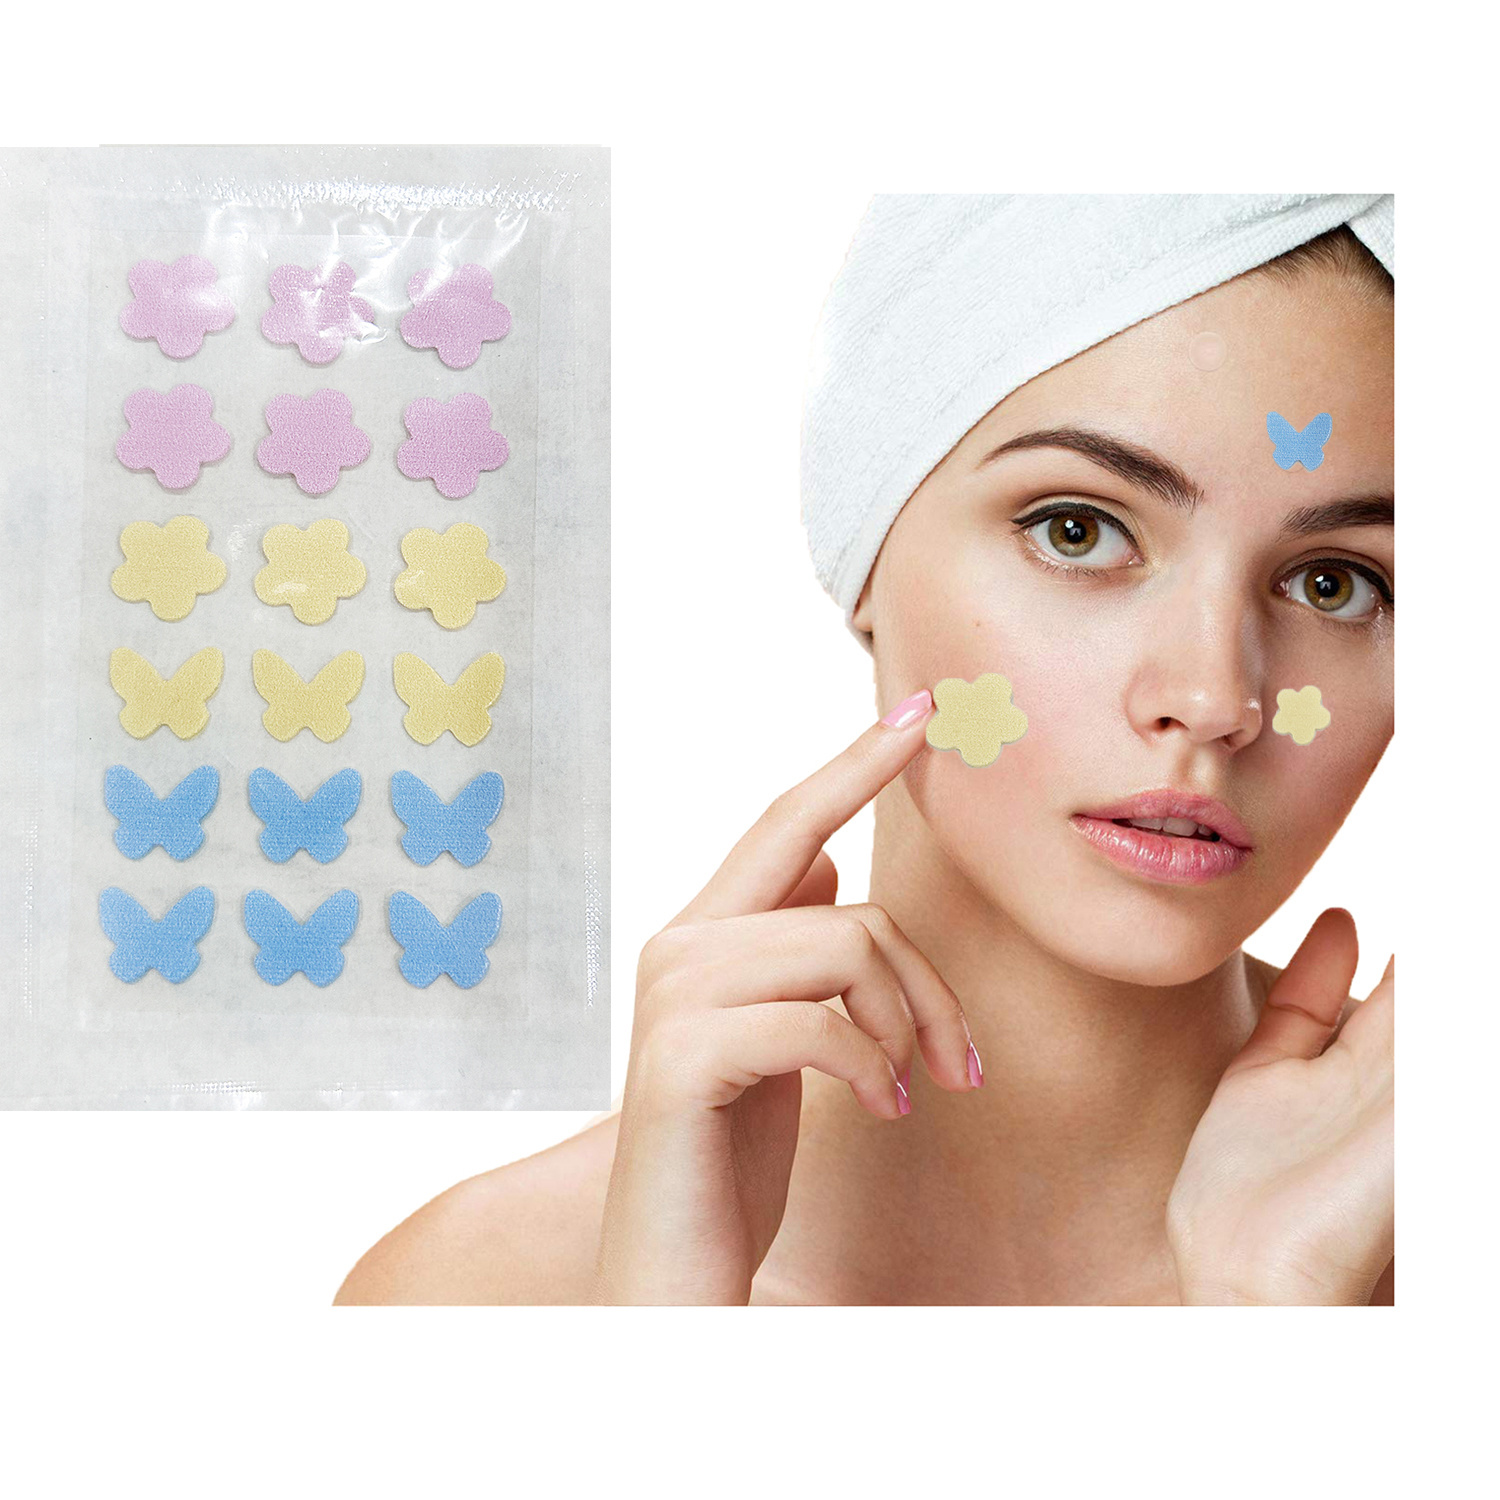 18 dots acne pimple patch,3 colors printing,flower +butterfly shape